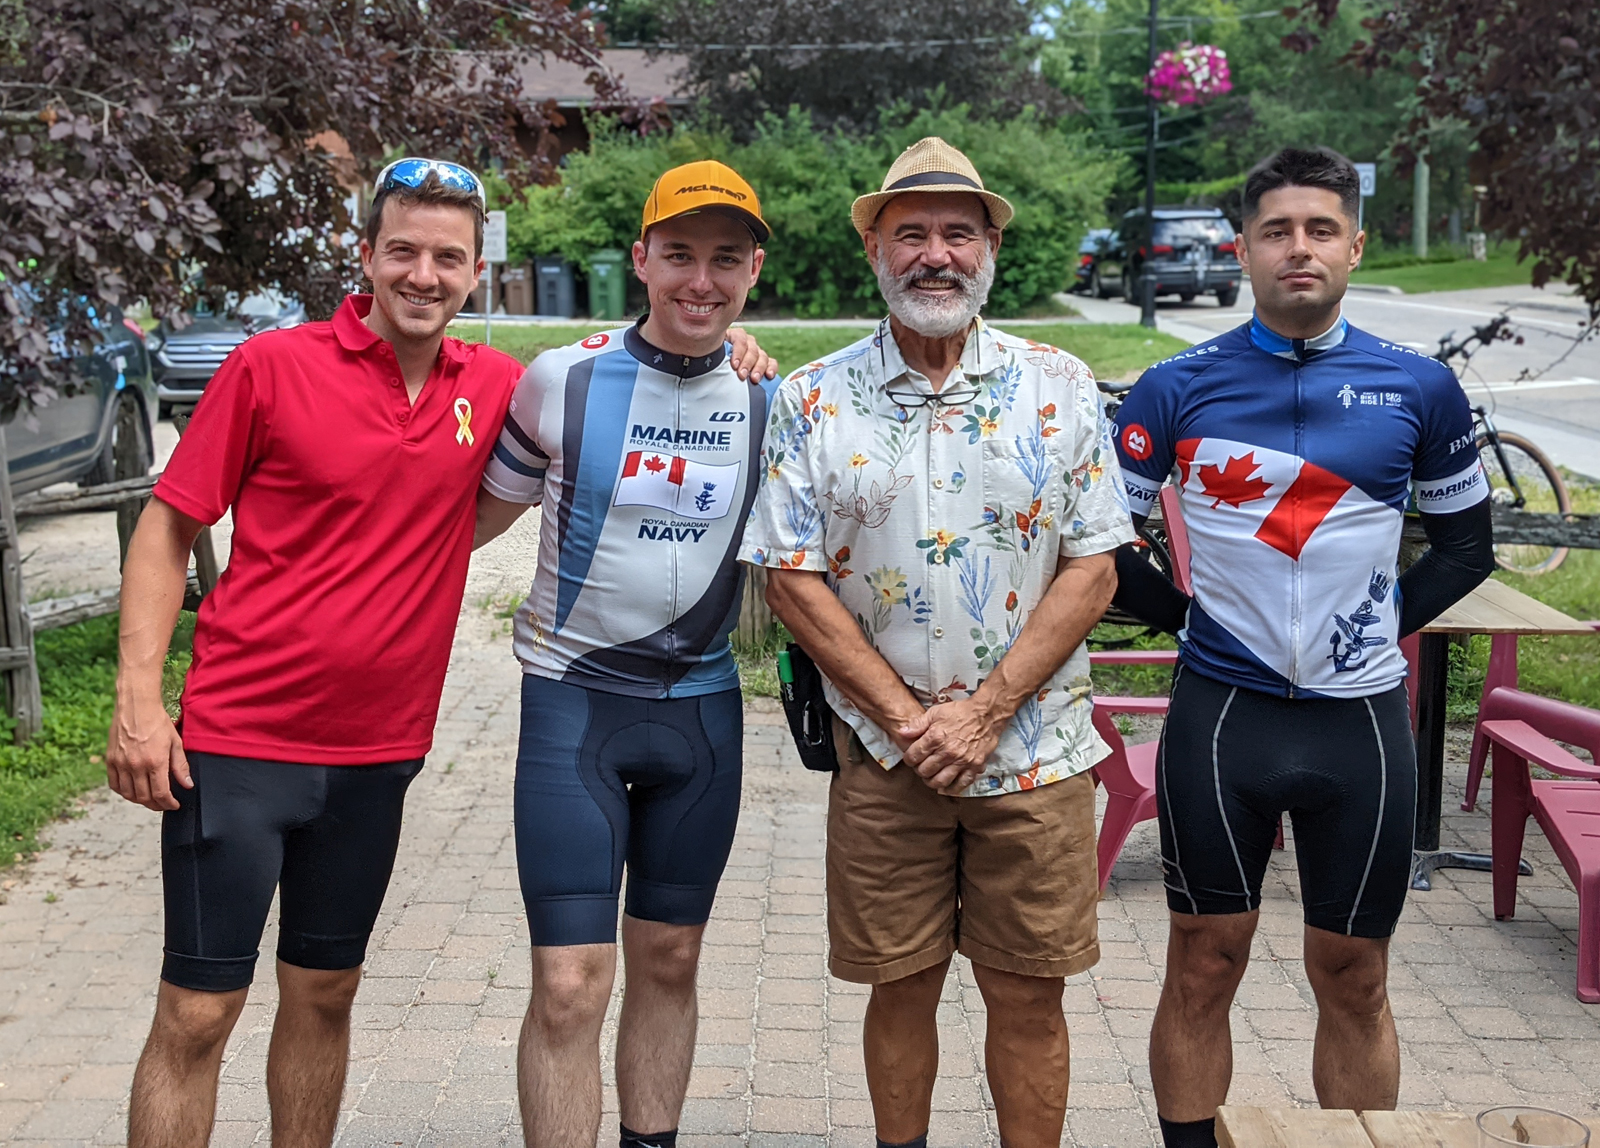 Cyclists from Team HMCS Donnacona pose for a group photo before their Navy Bike Ride trek in Mont-Tremblant on July 22. From Left: Team members Gabriel Fontaine, Mikey Colangelo Lauzon and Philippe Gagnon are joined by Maj (ret’d) Pierre Carron who was there to wish them good luck on their journey. Photo by Mikey Colangelo Lauzon